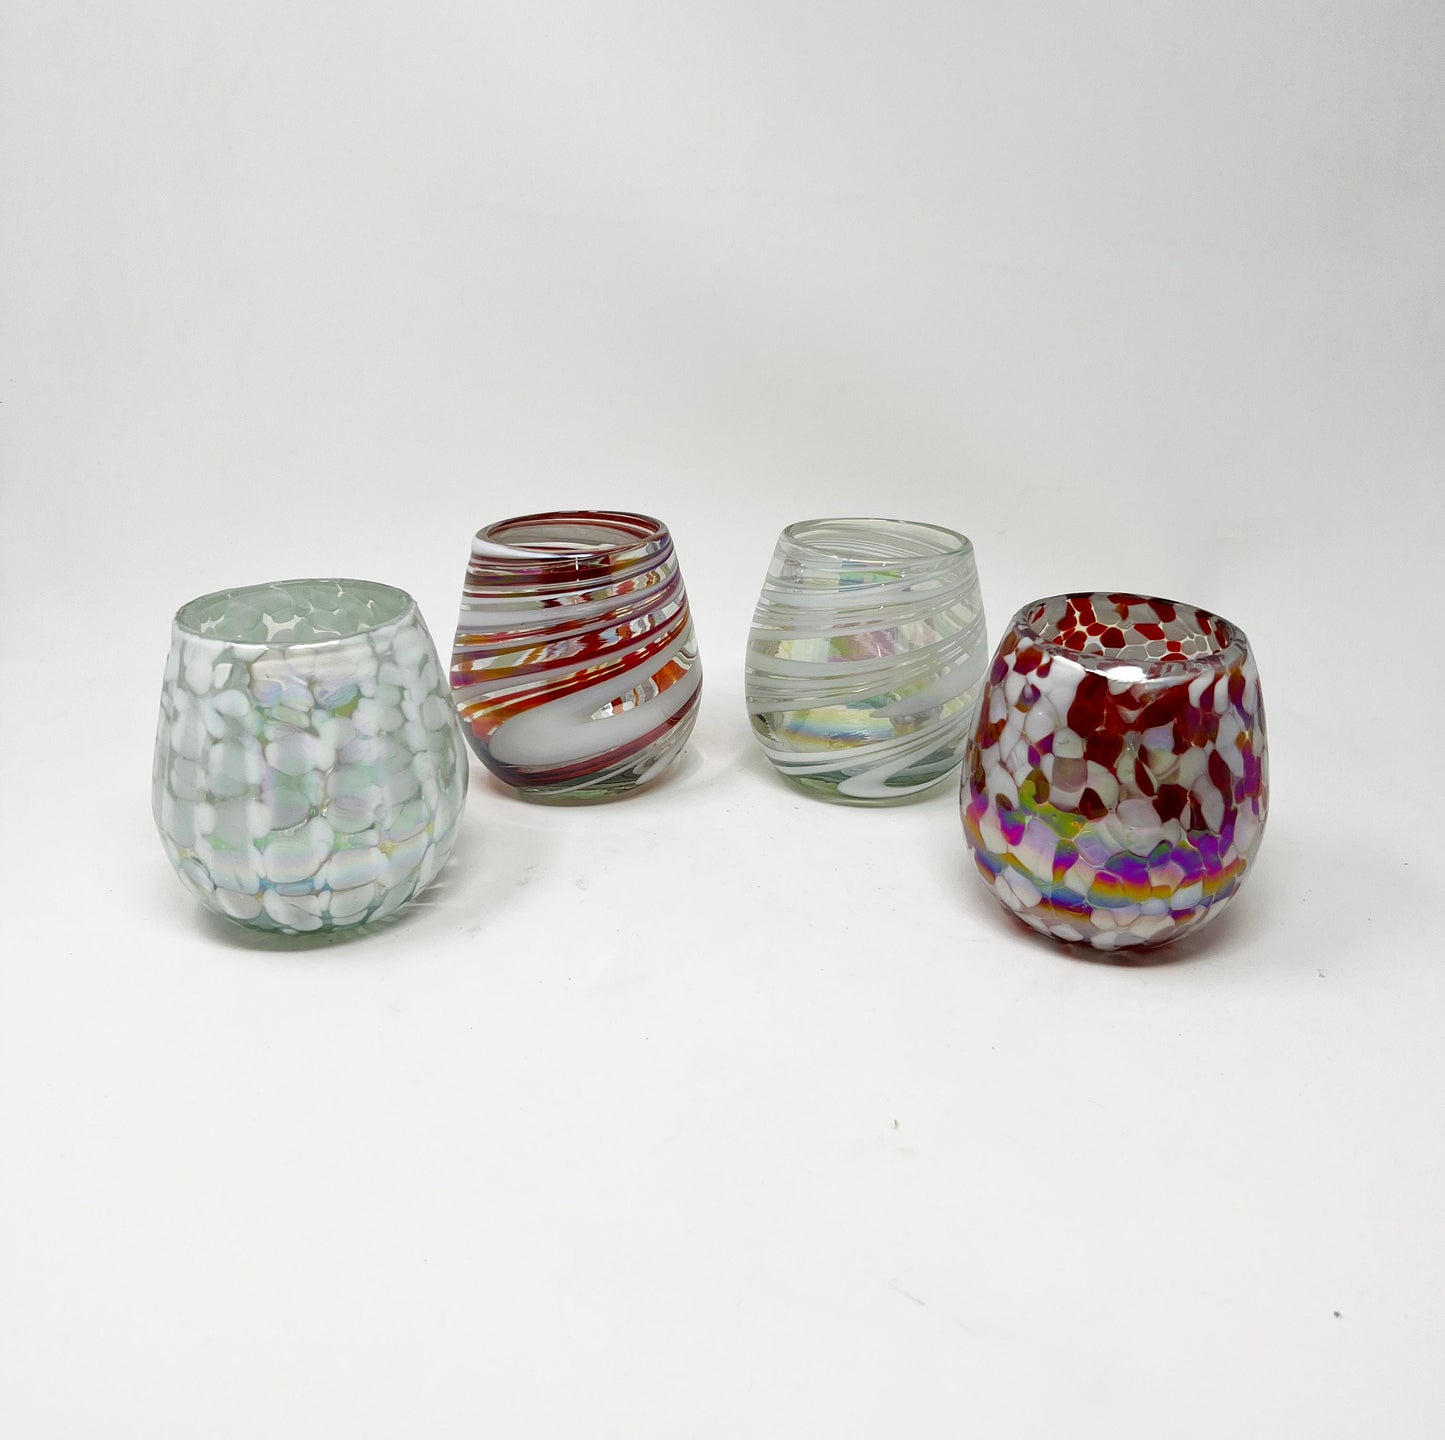 4 Stemless Wine Glasses - Christmas 22 Collection (Iridescent)